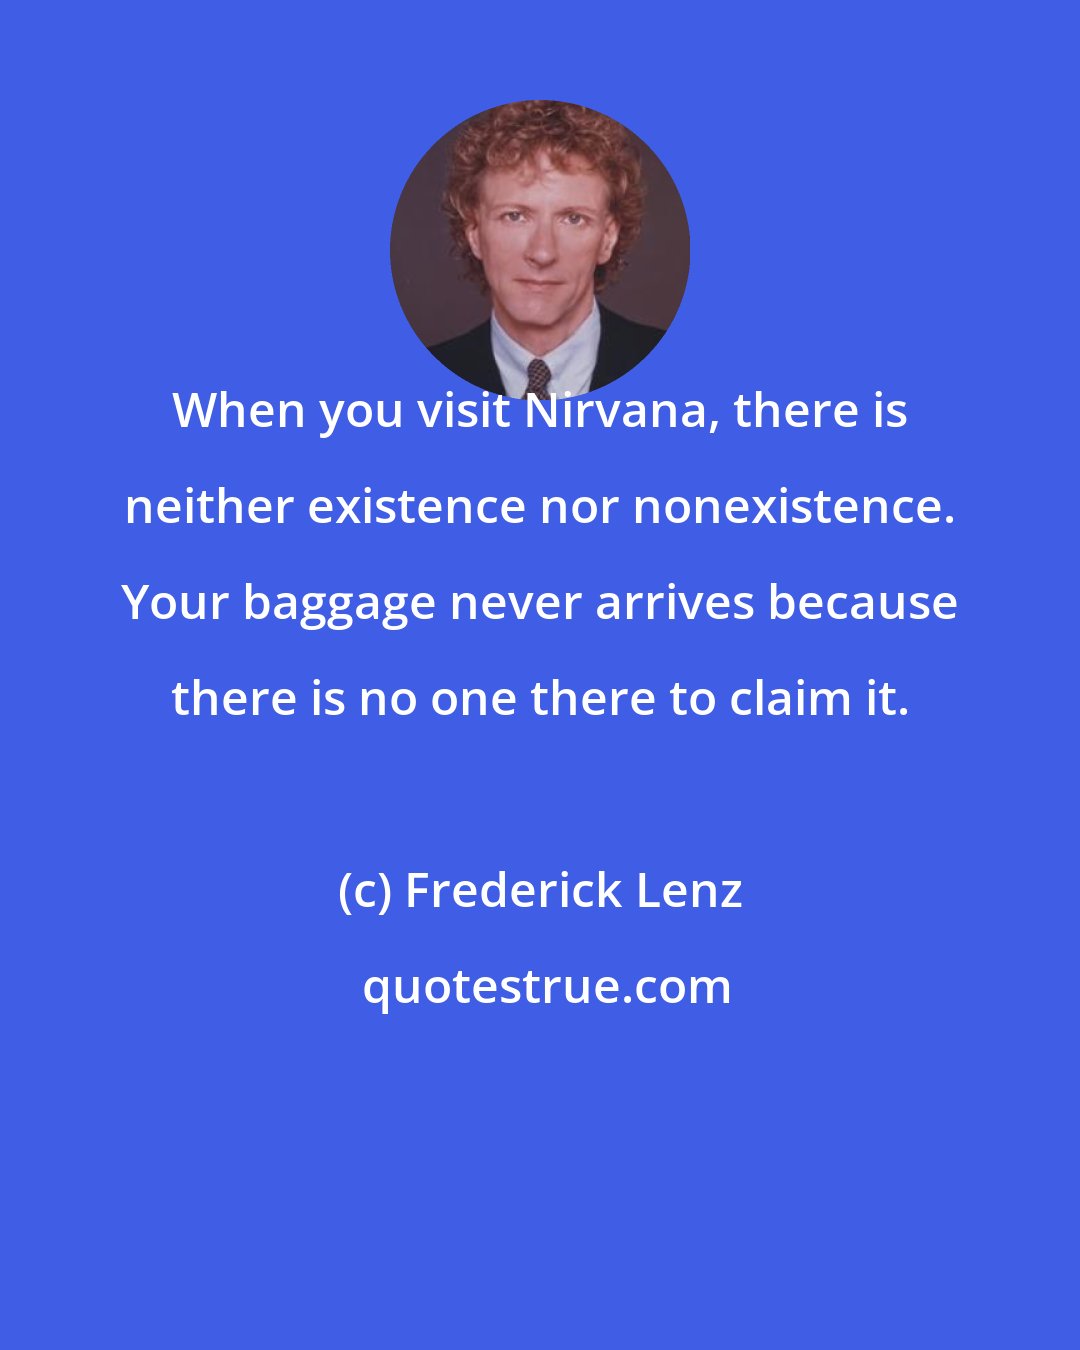 Frederick Lenz: When you visit Nirvana, there is neither existence nor nonexistence. Your baggage never arrives because there is no one there to claim it.